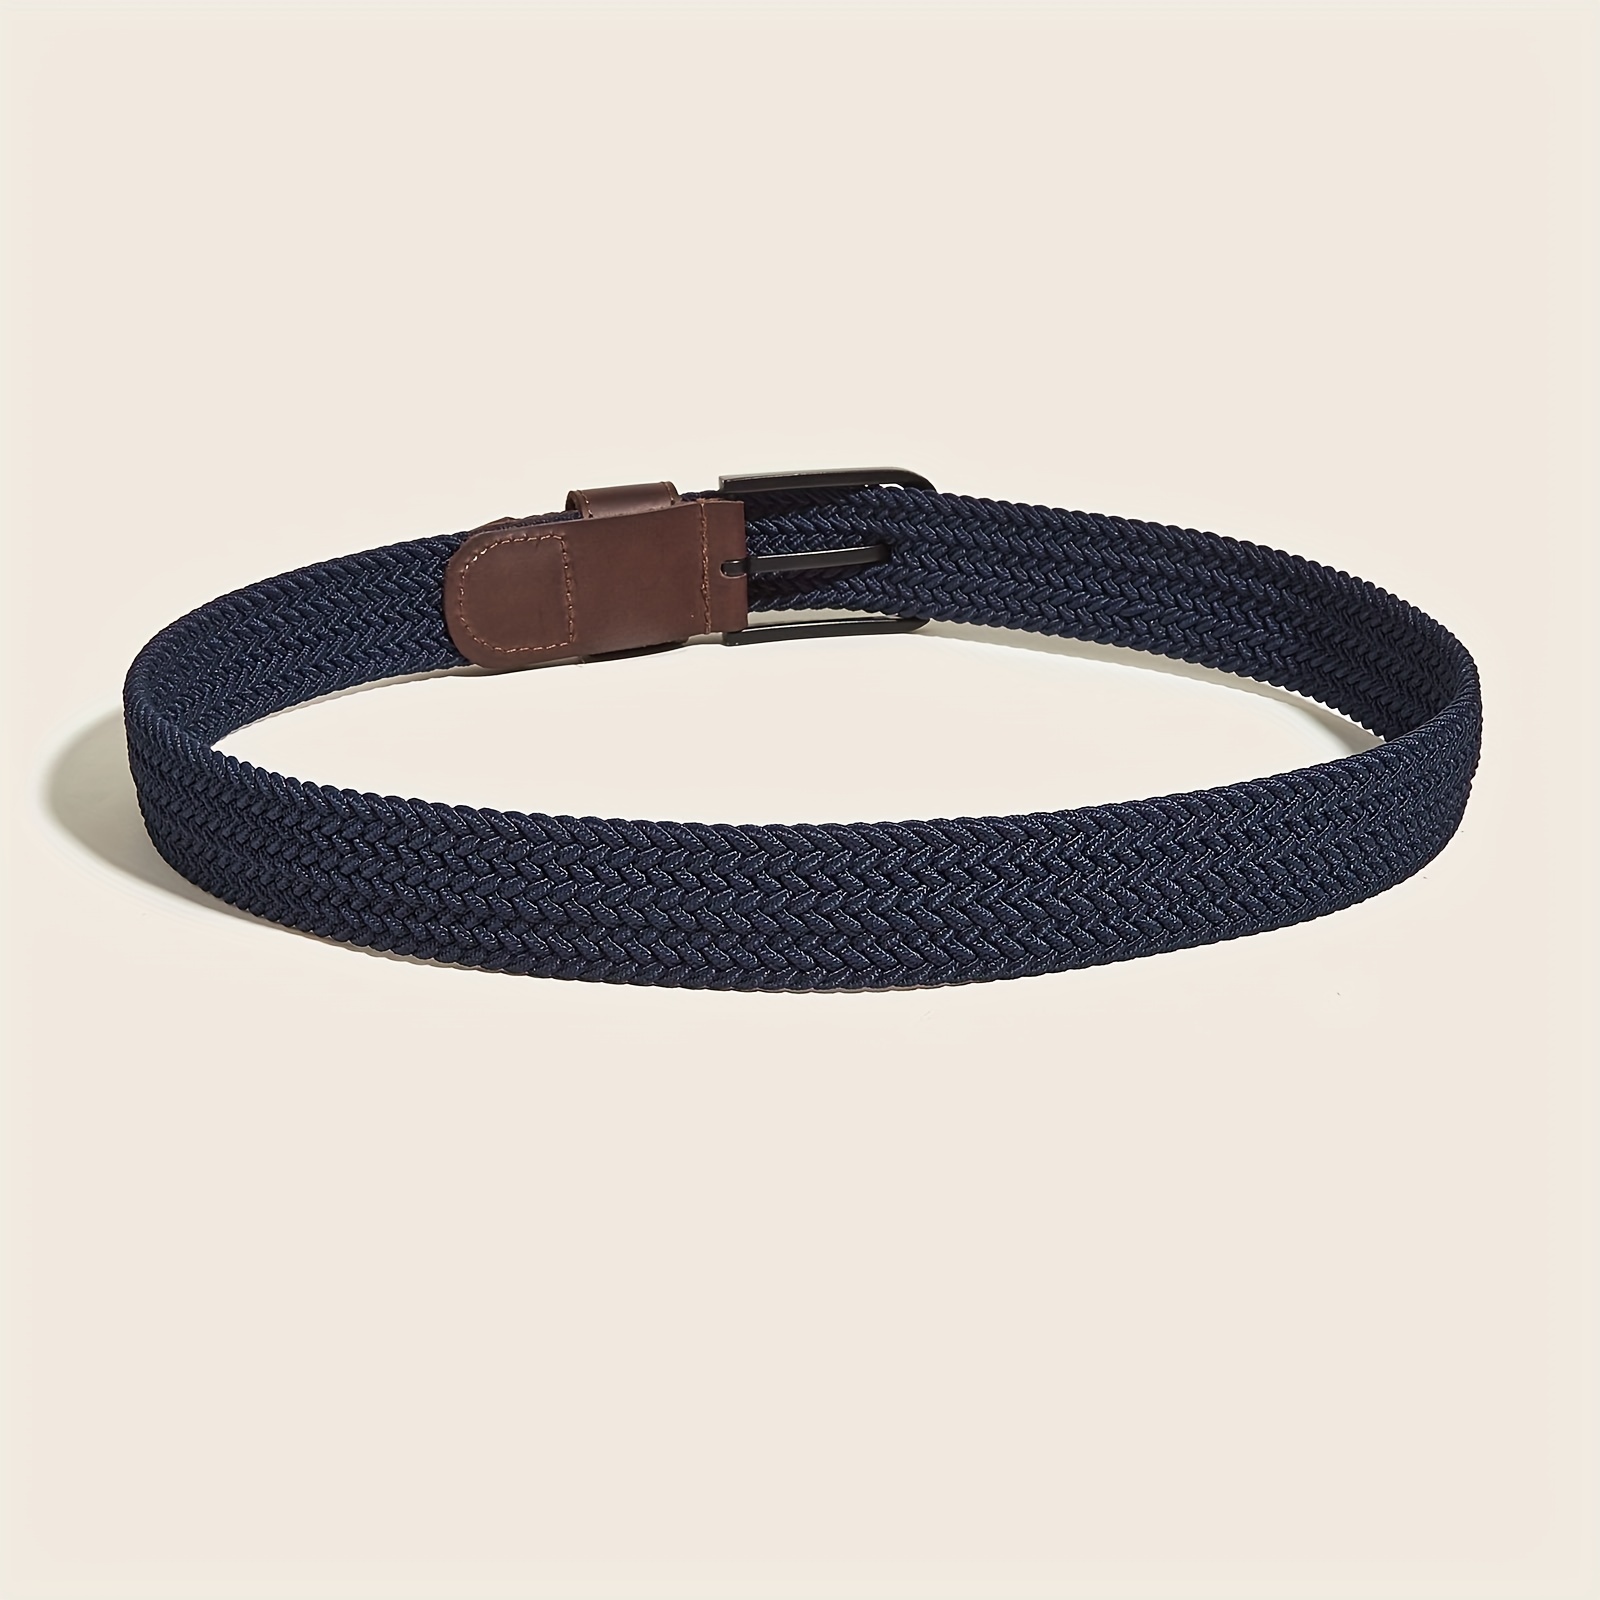 Casual belt in genuine leather, royal blue